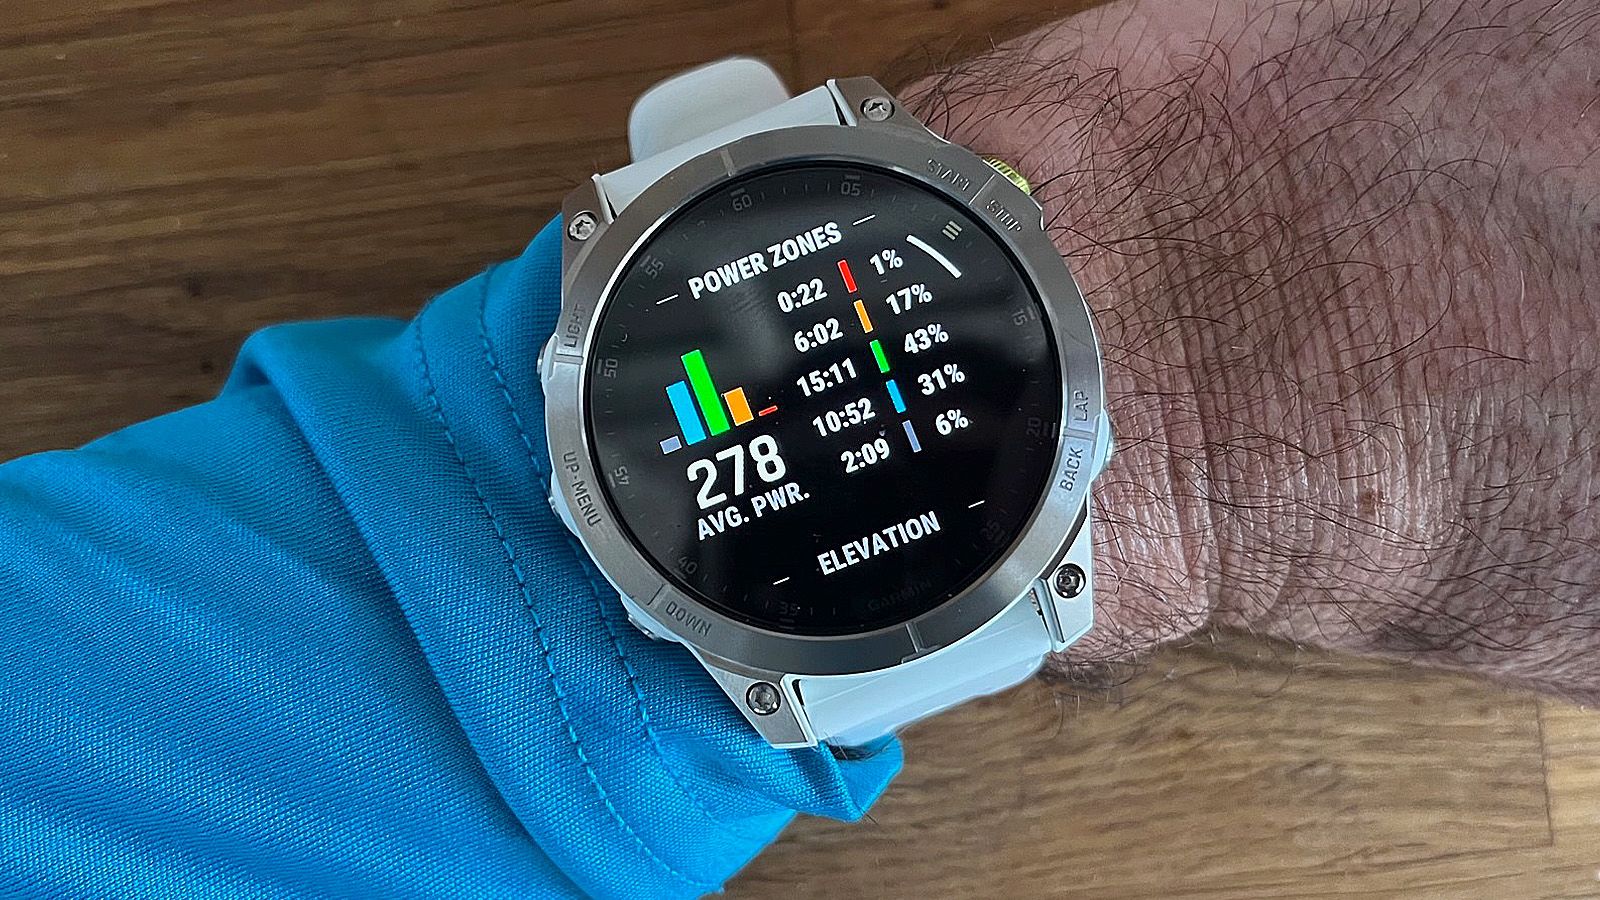 Garmin Epix 2 vs. Epix Pro 2: Analyzing the differences in design, features  and price - Wareable